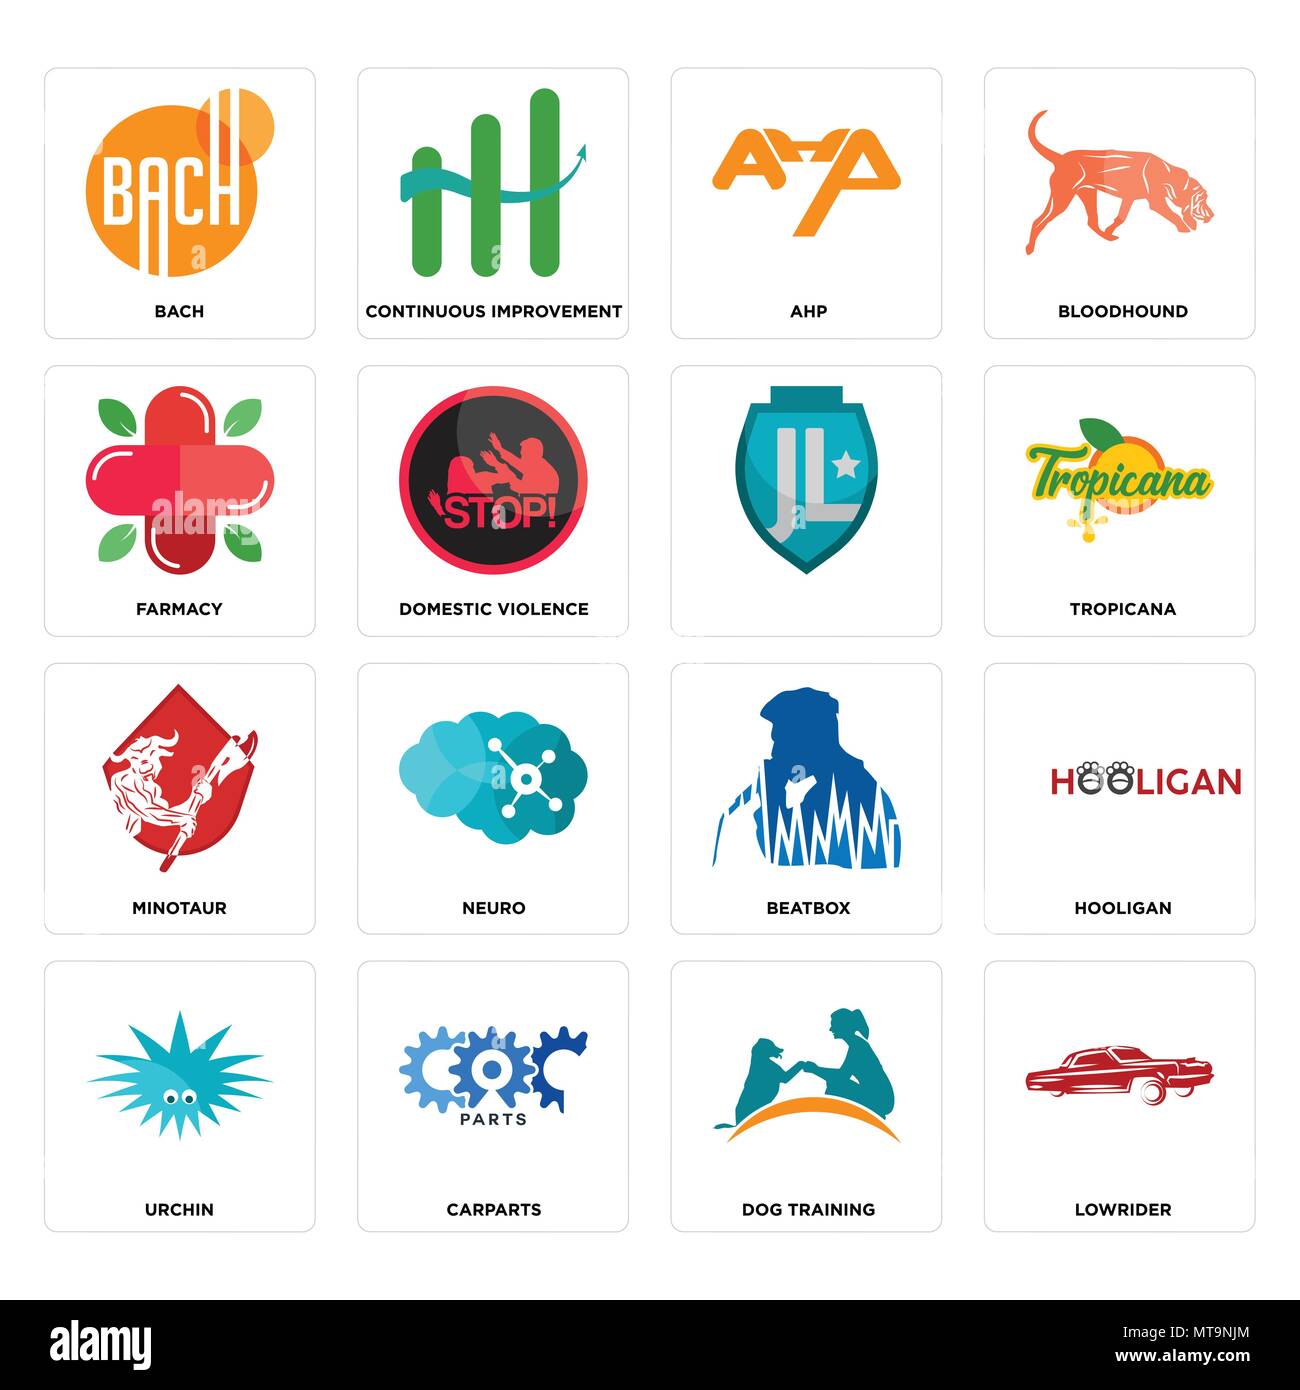 Set Of 16 simple editable icons such as lowrider, dog training, carparts, urchin, hooligan, bach, farmacy, minotaur, can be used for mobile, web UI Stock Vector